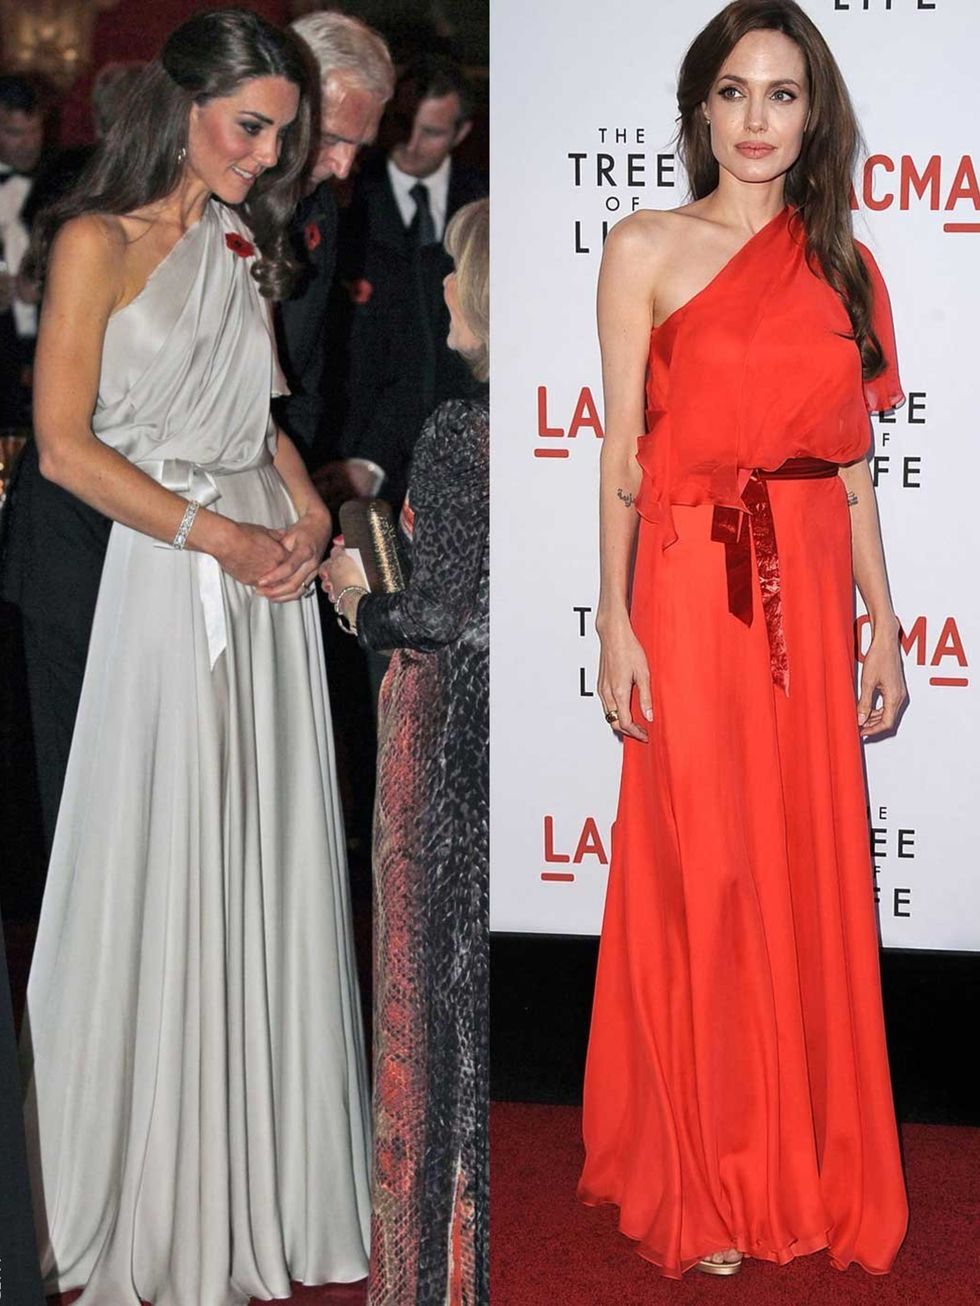 <p>The Duchess of Cambridge and Angelina Jolie in similar Jenny Packham gowns.</p>